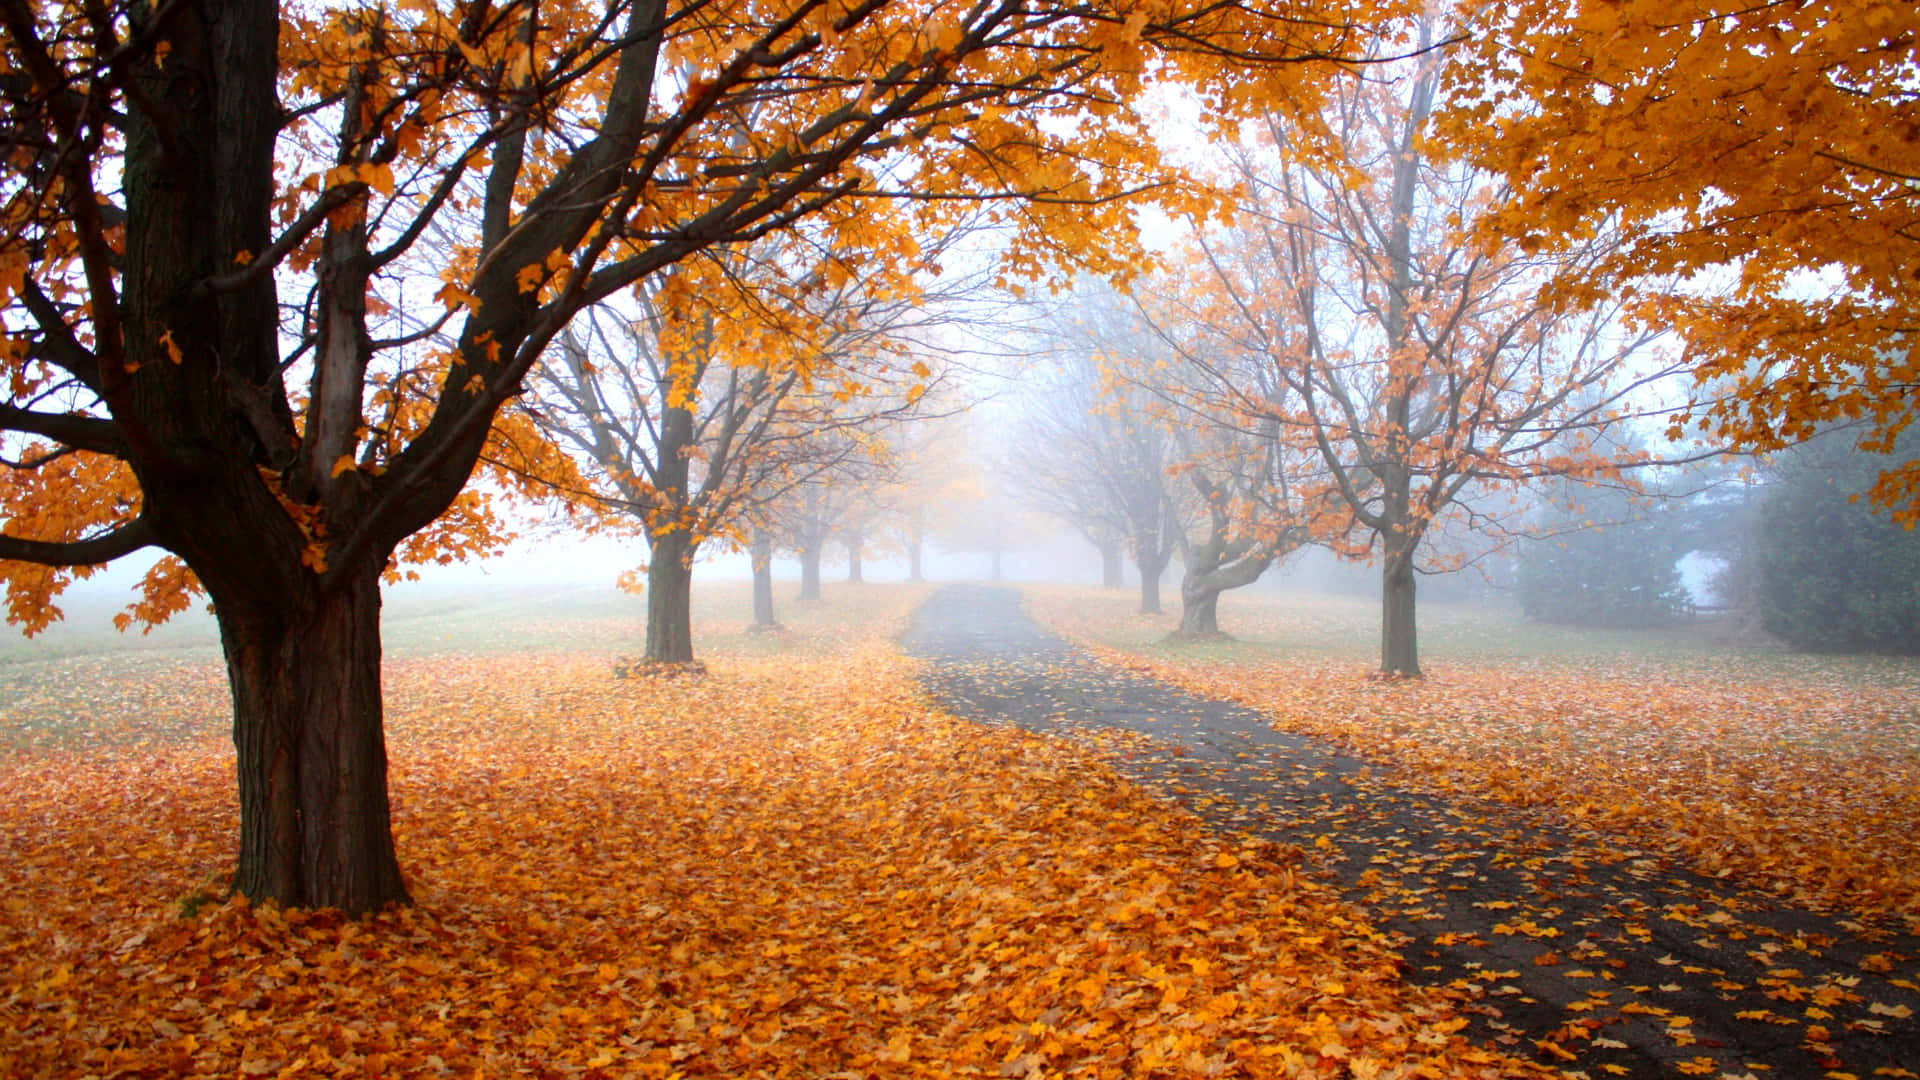 Vibrant Yellow Leaves in Autumn Wallpaper